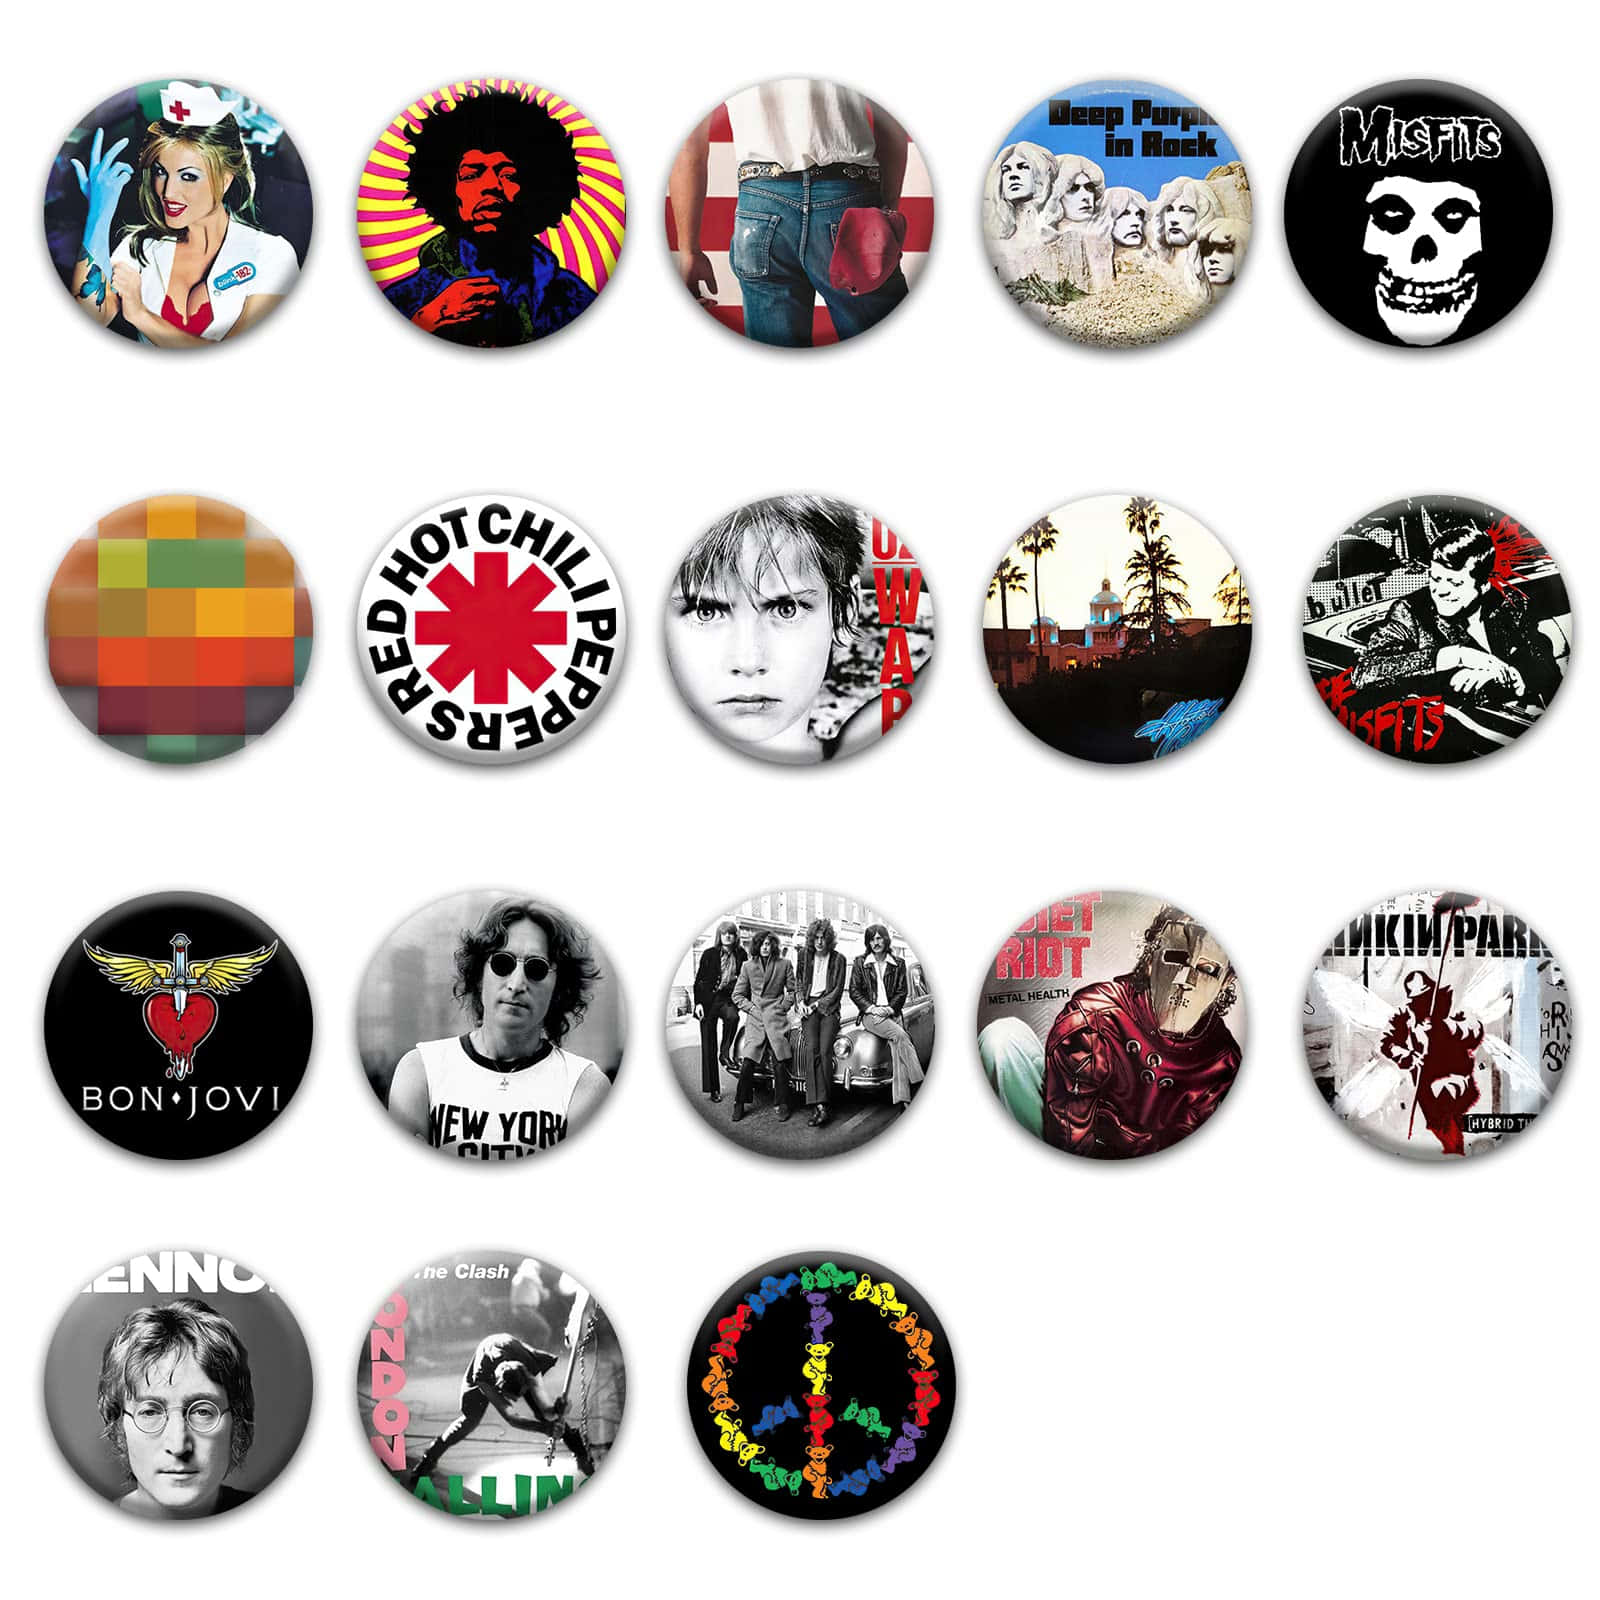 A Collection Of Buttons With Various Images Of Bands